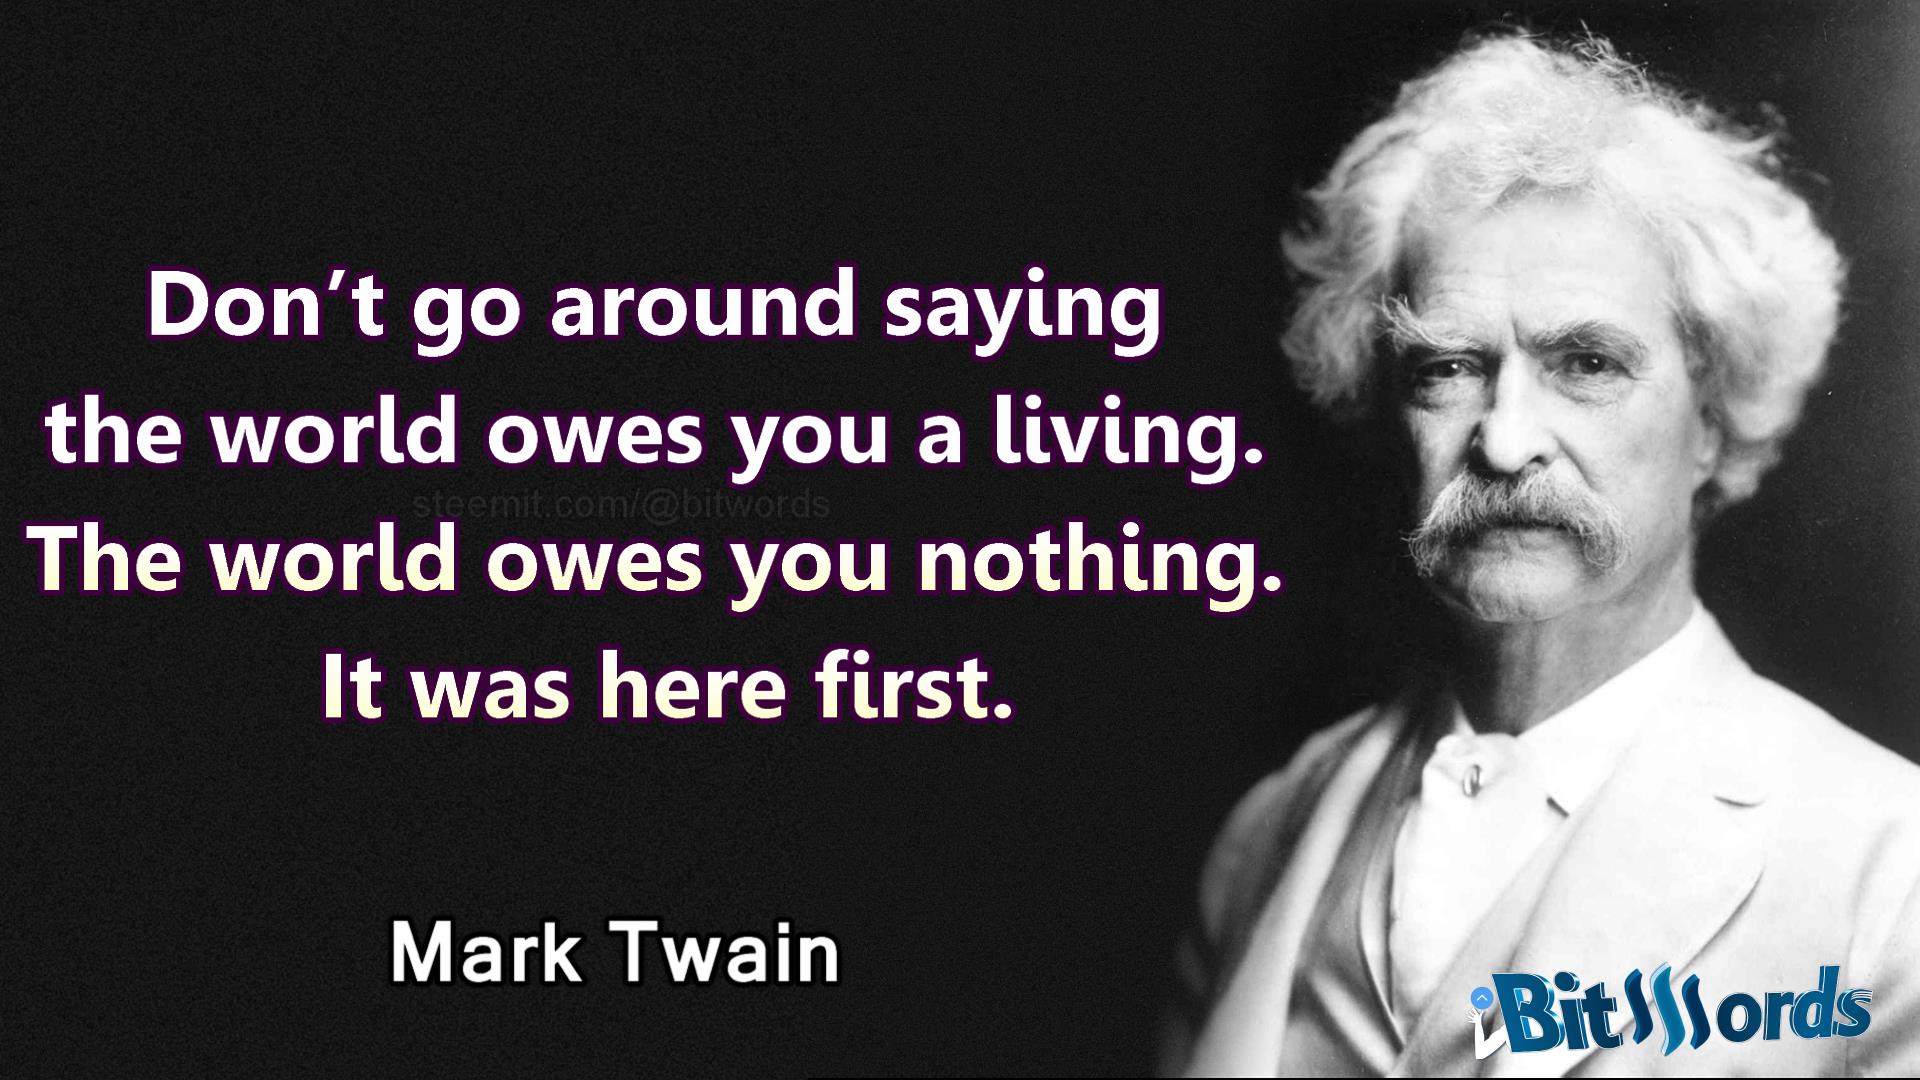 Mark Twain quotations - The Word The